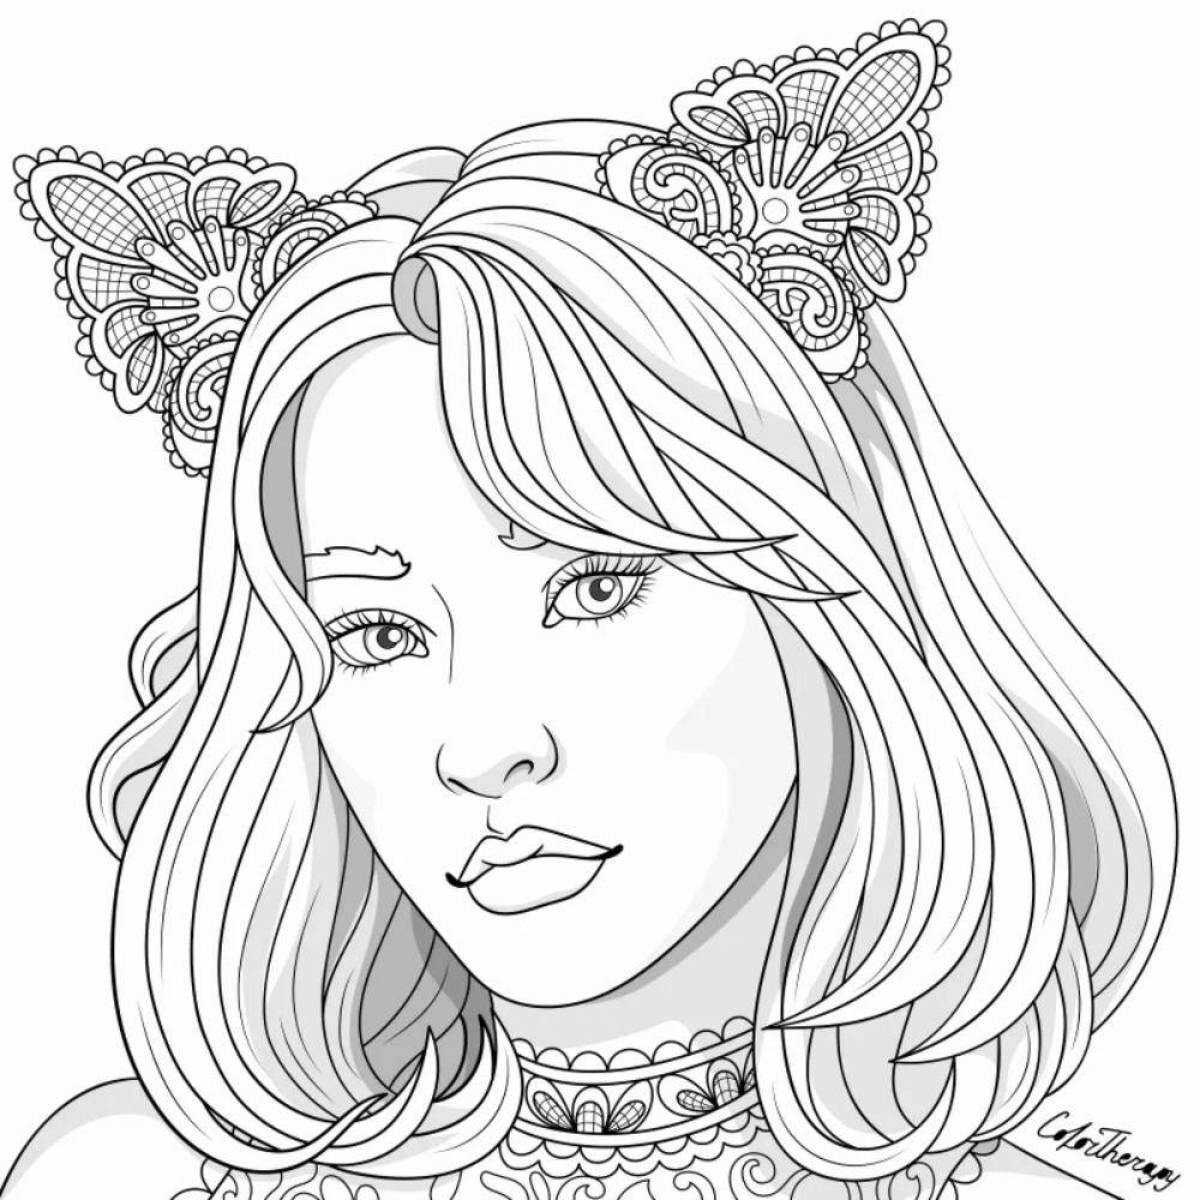 A wonderful coloring book popular with girls